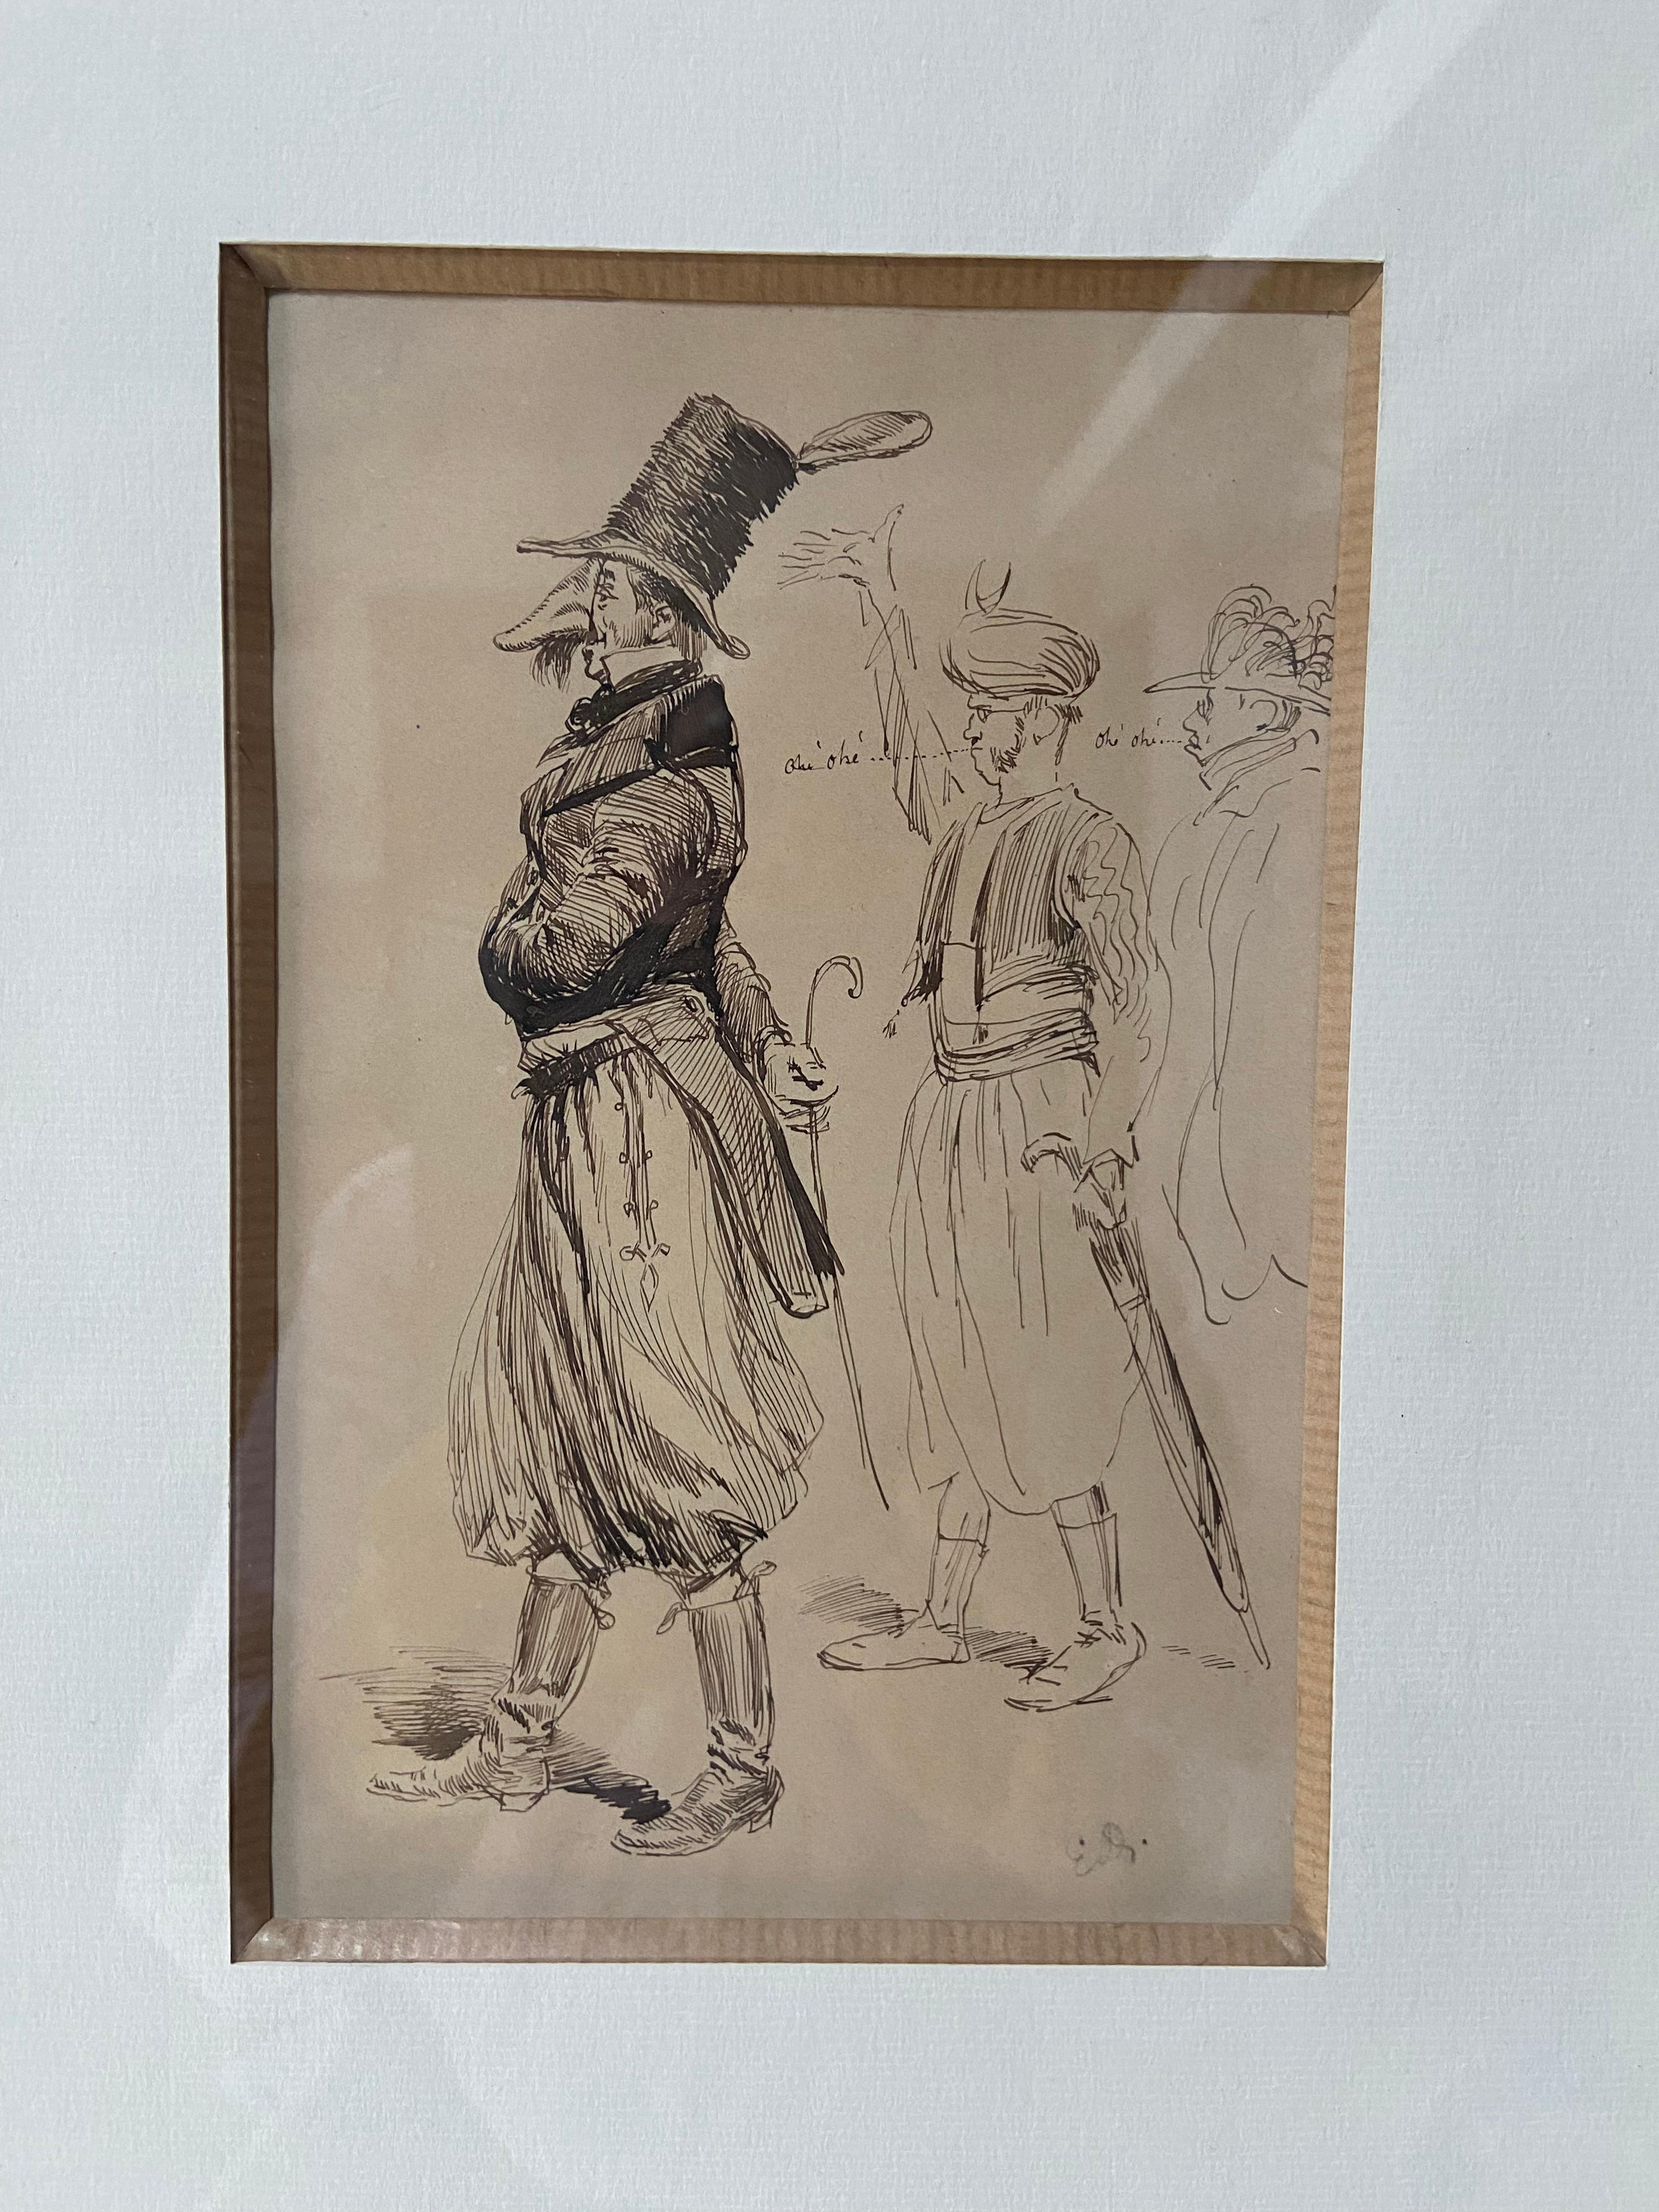 Edouard Detaille (1848 1912), A Carnival character, original signed Drawing - Academic Art by Jean Baptiste Édouard Detaille